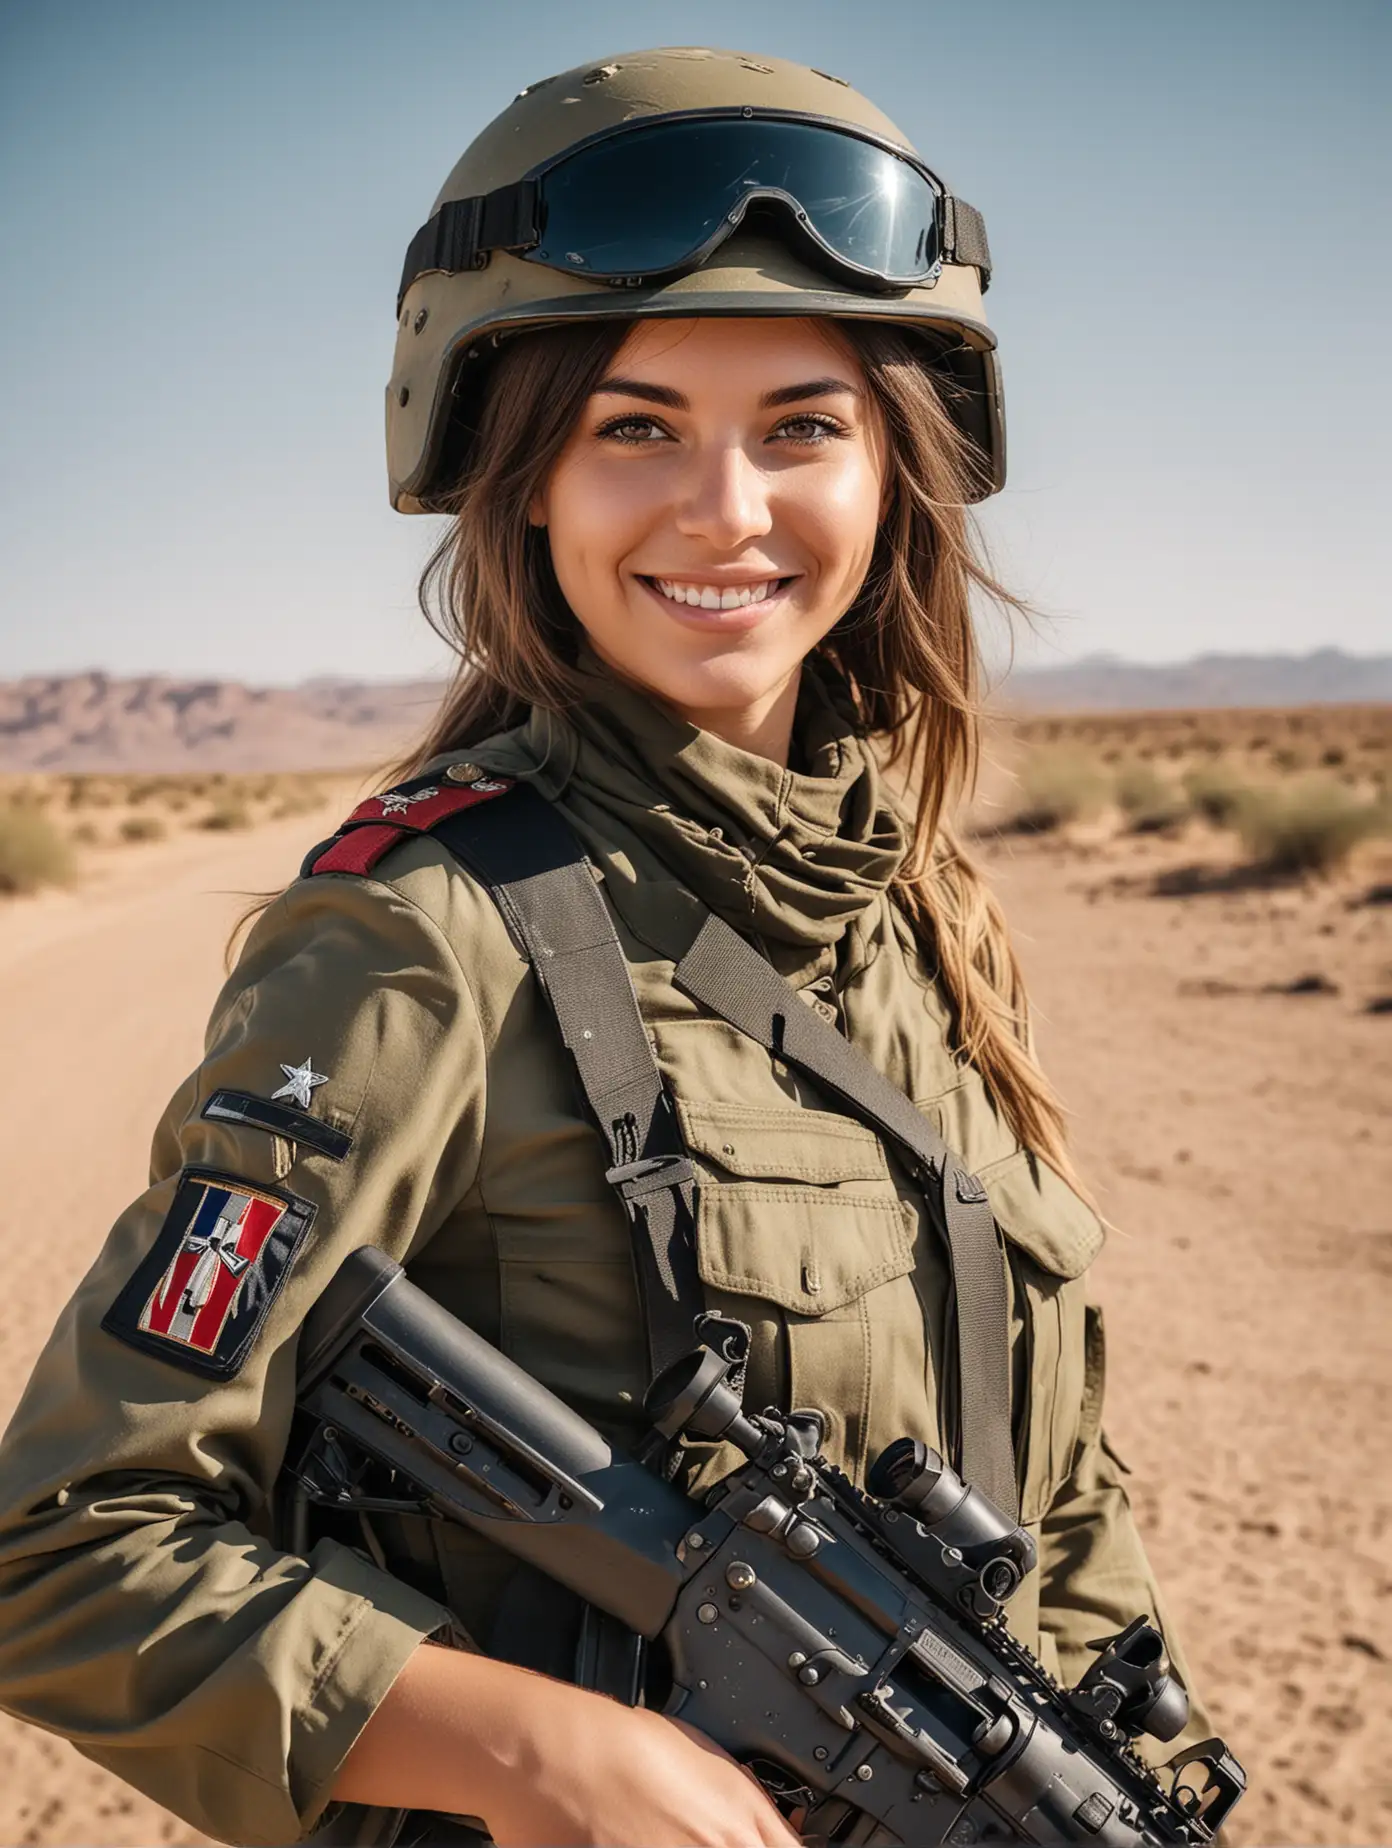 Smiling Europe Girl in Military Uniform with M4 Rifle in Desert